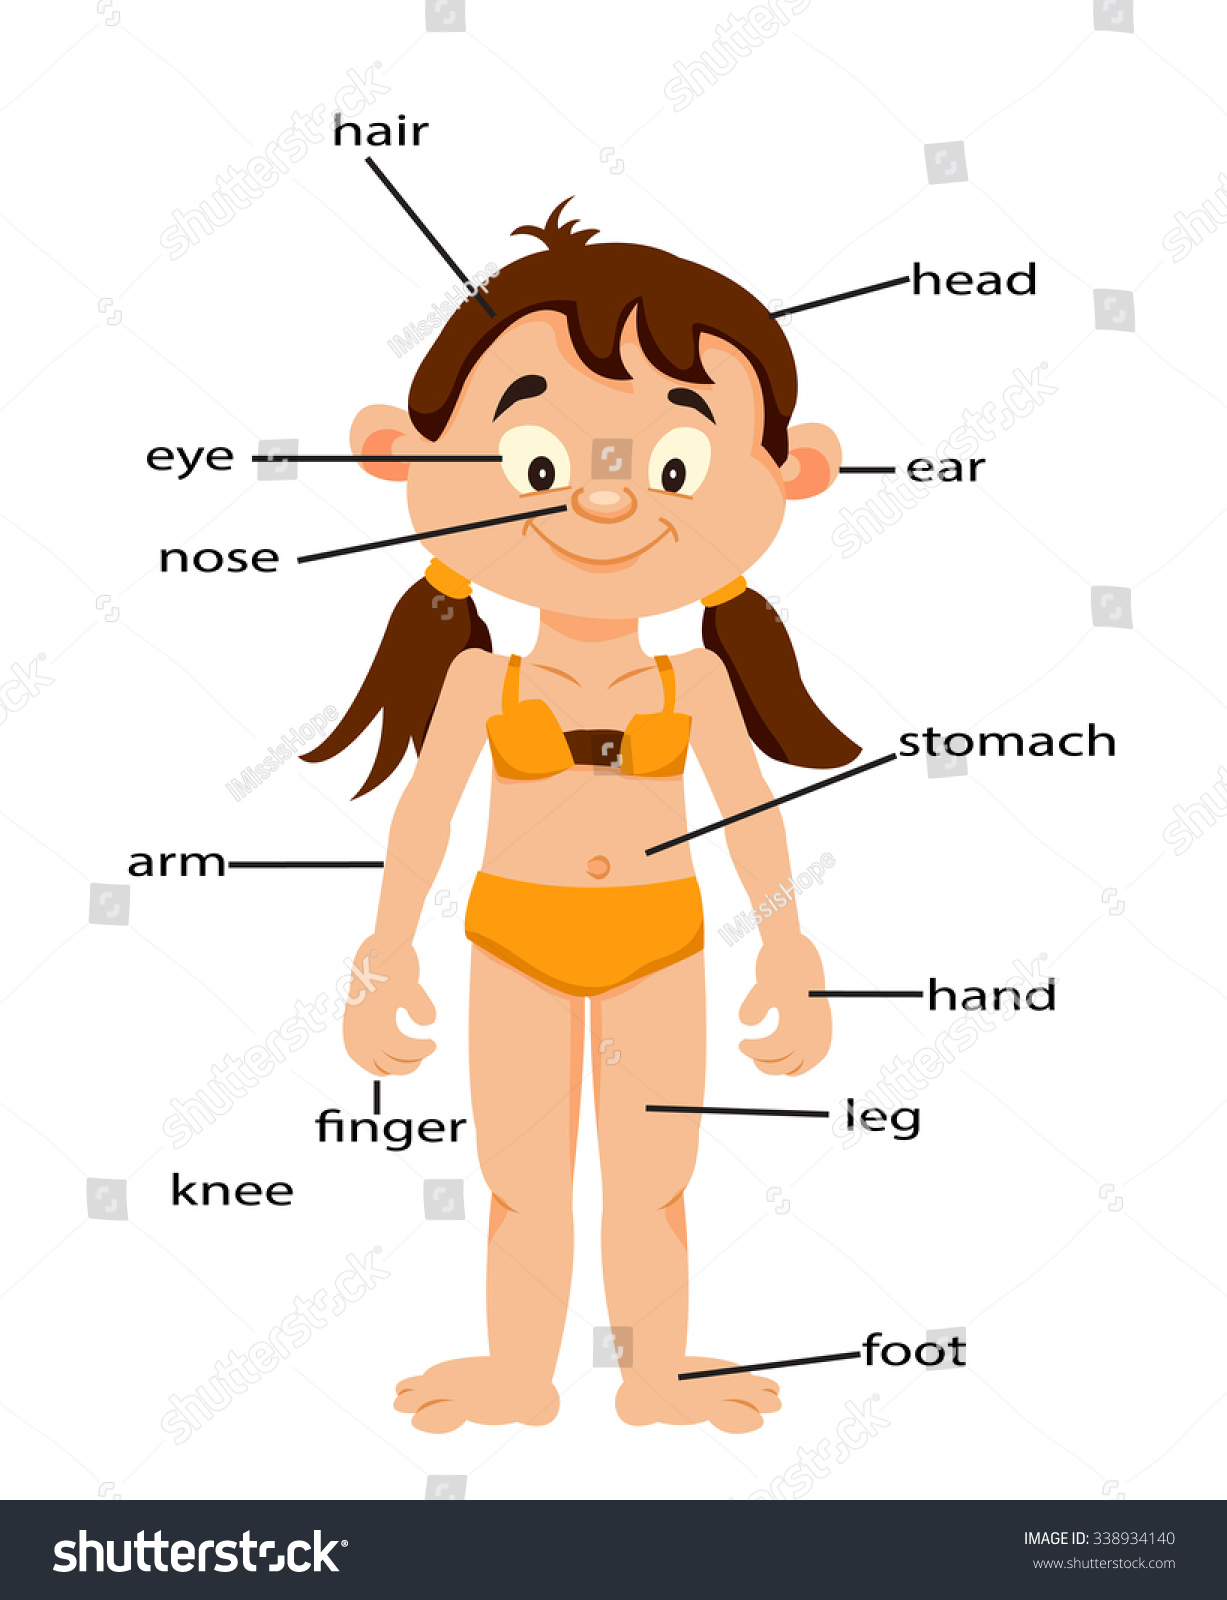 Girl Signed Body Parts English Learn Stock Vector 338934140 - Shutterstock